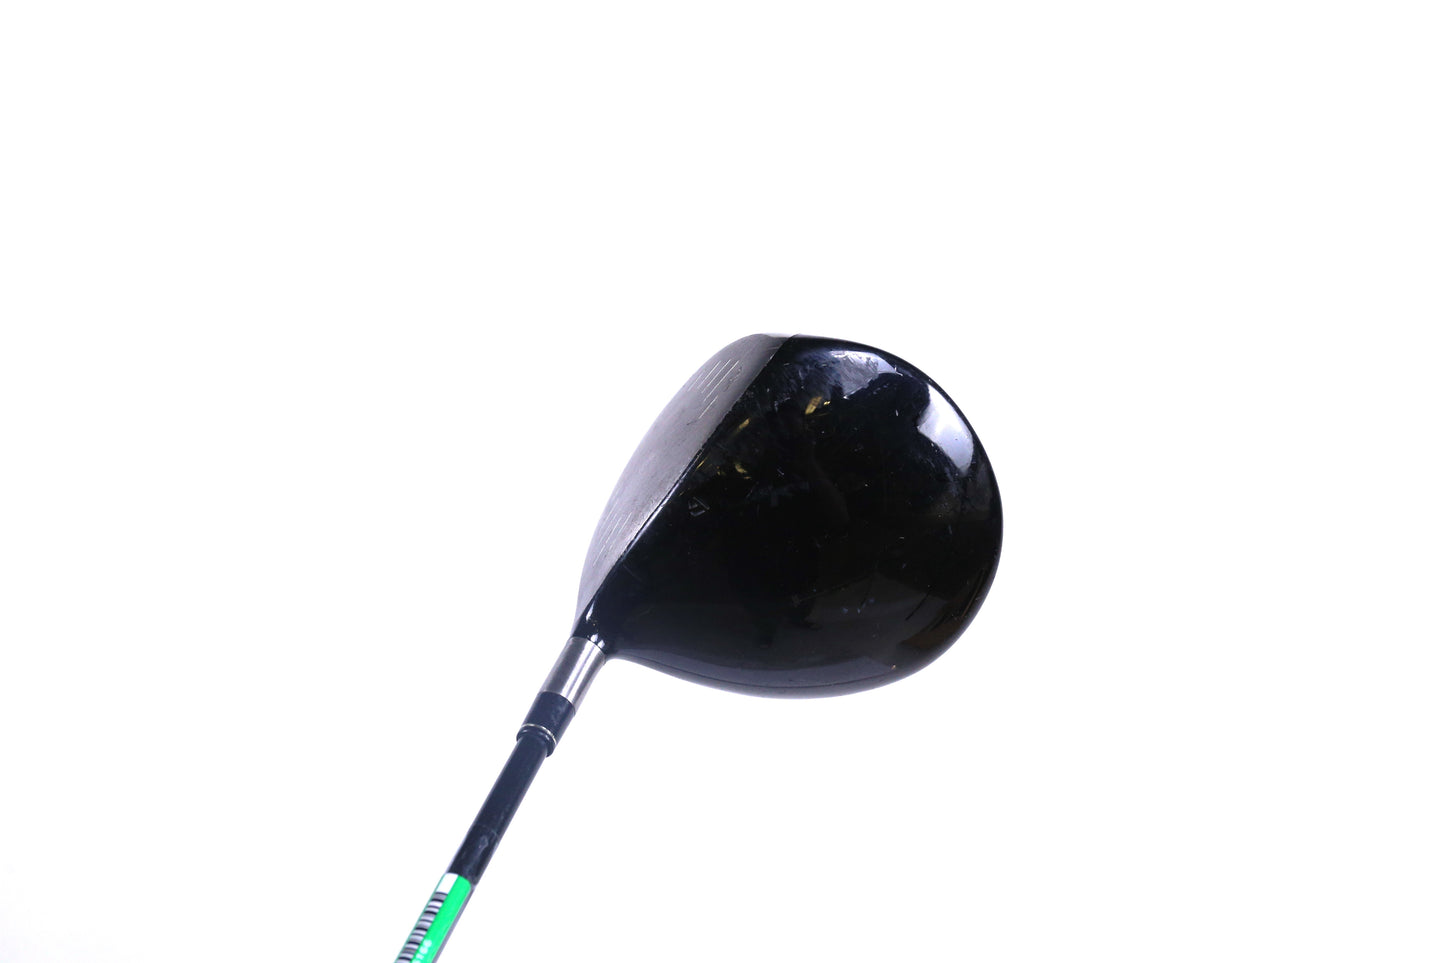 TaylorMade r7 Draw Driver - Right-Handed - 10.5 Degrees - Regular Flex